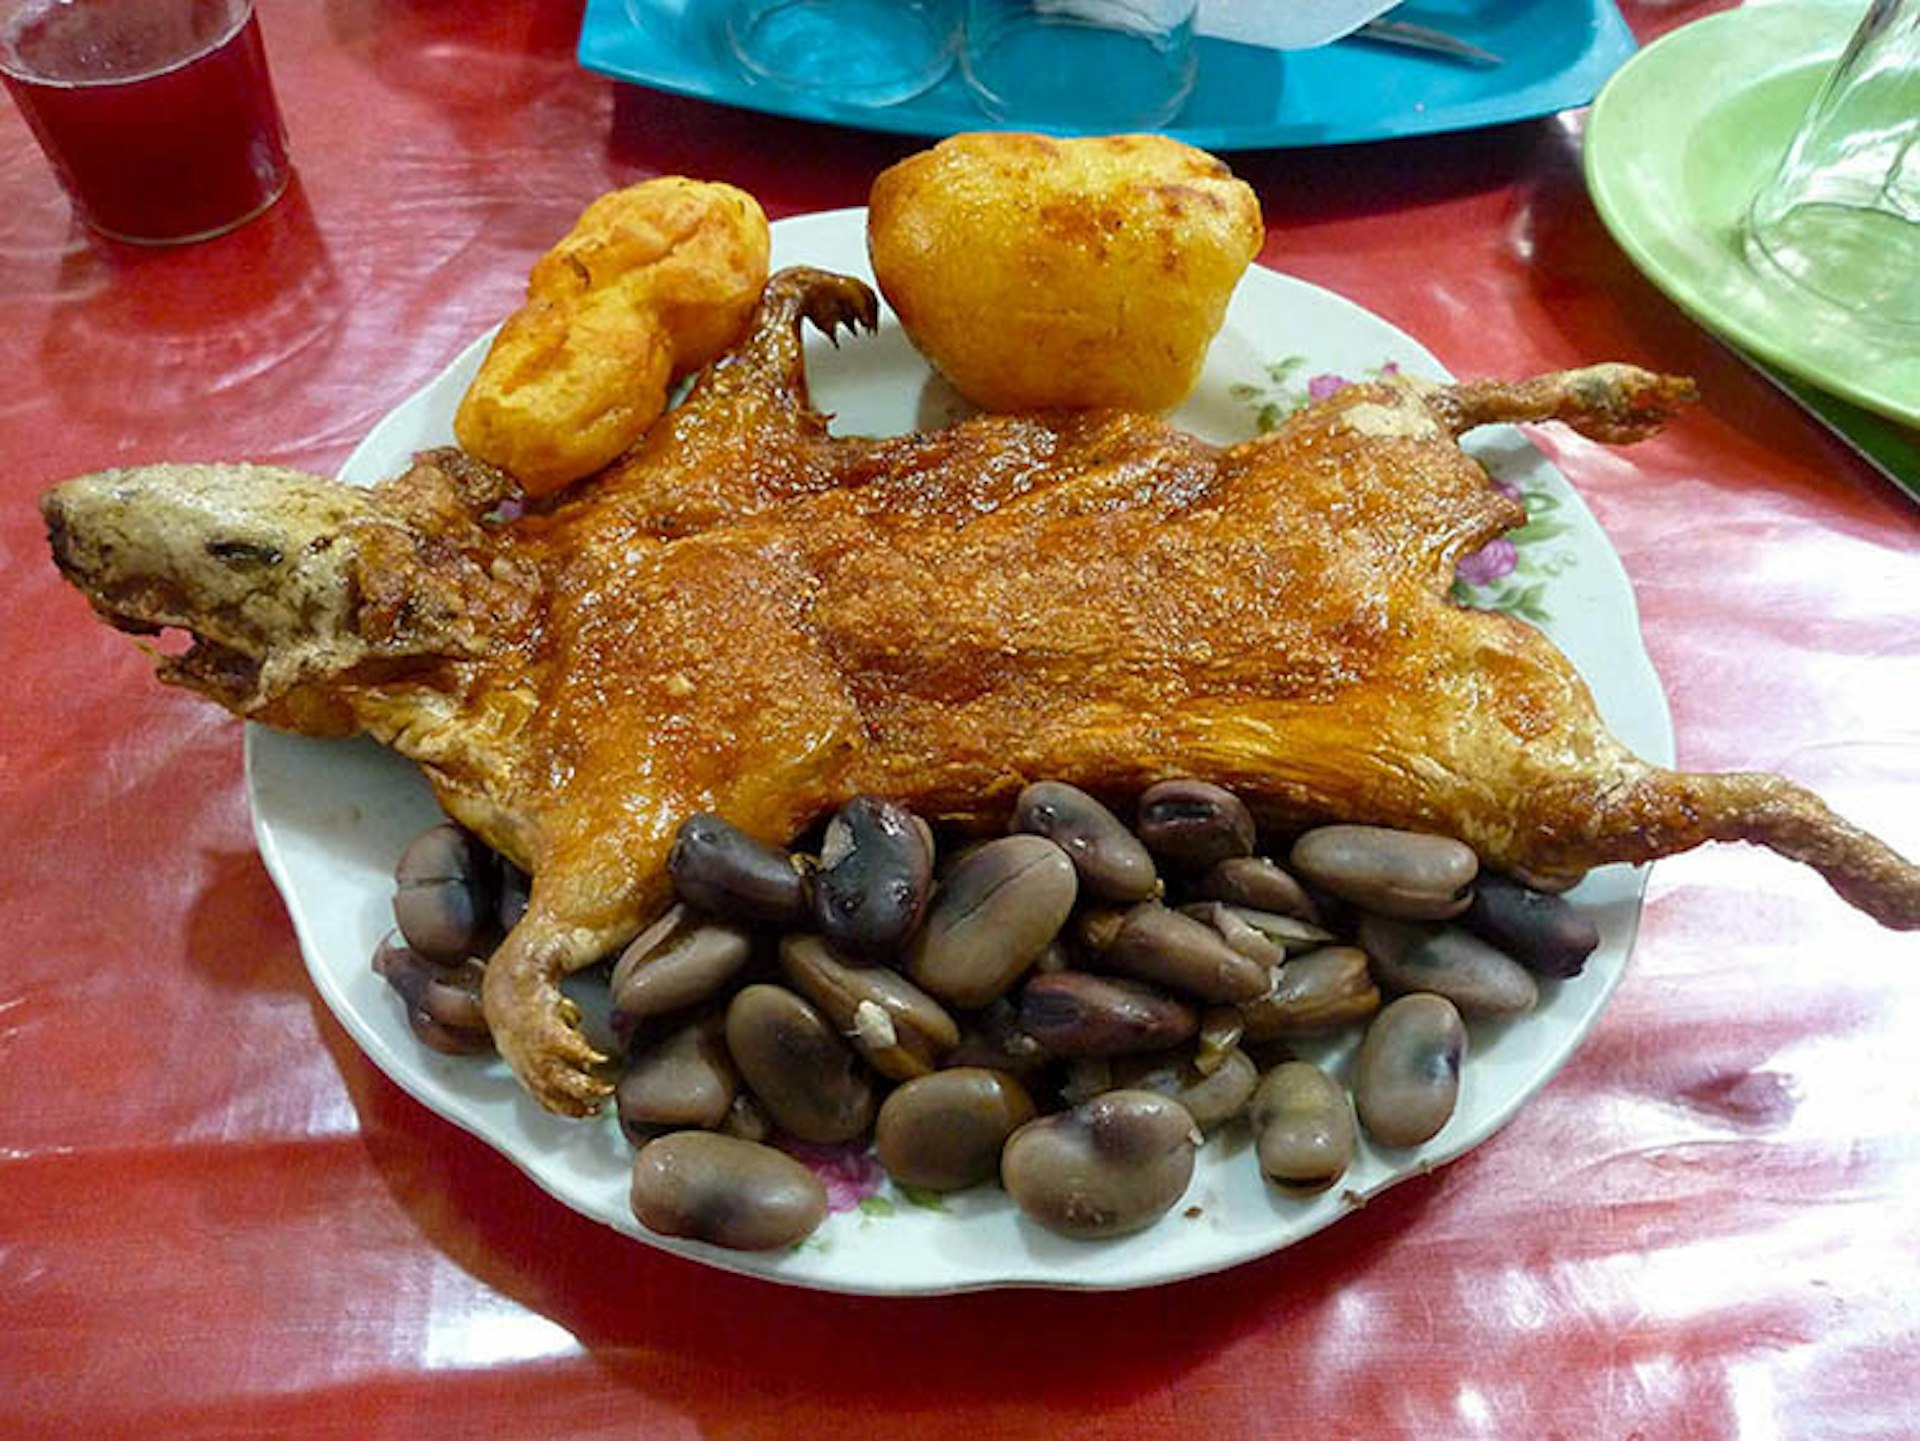 Not so cuddly now... a hearty plate of guinea pig, potatoes and beans in Peru. Image by Cute Kitten Images / Getty Images